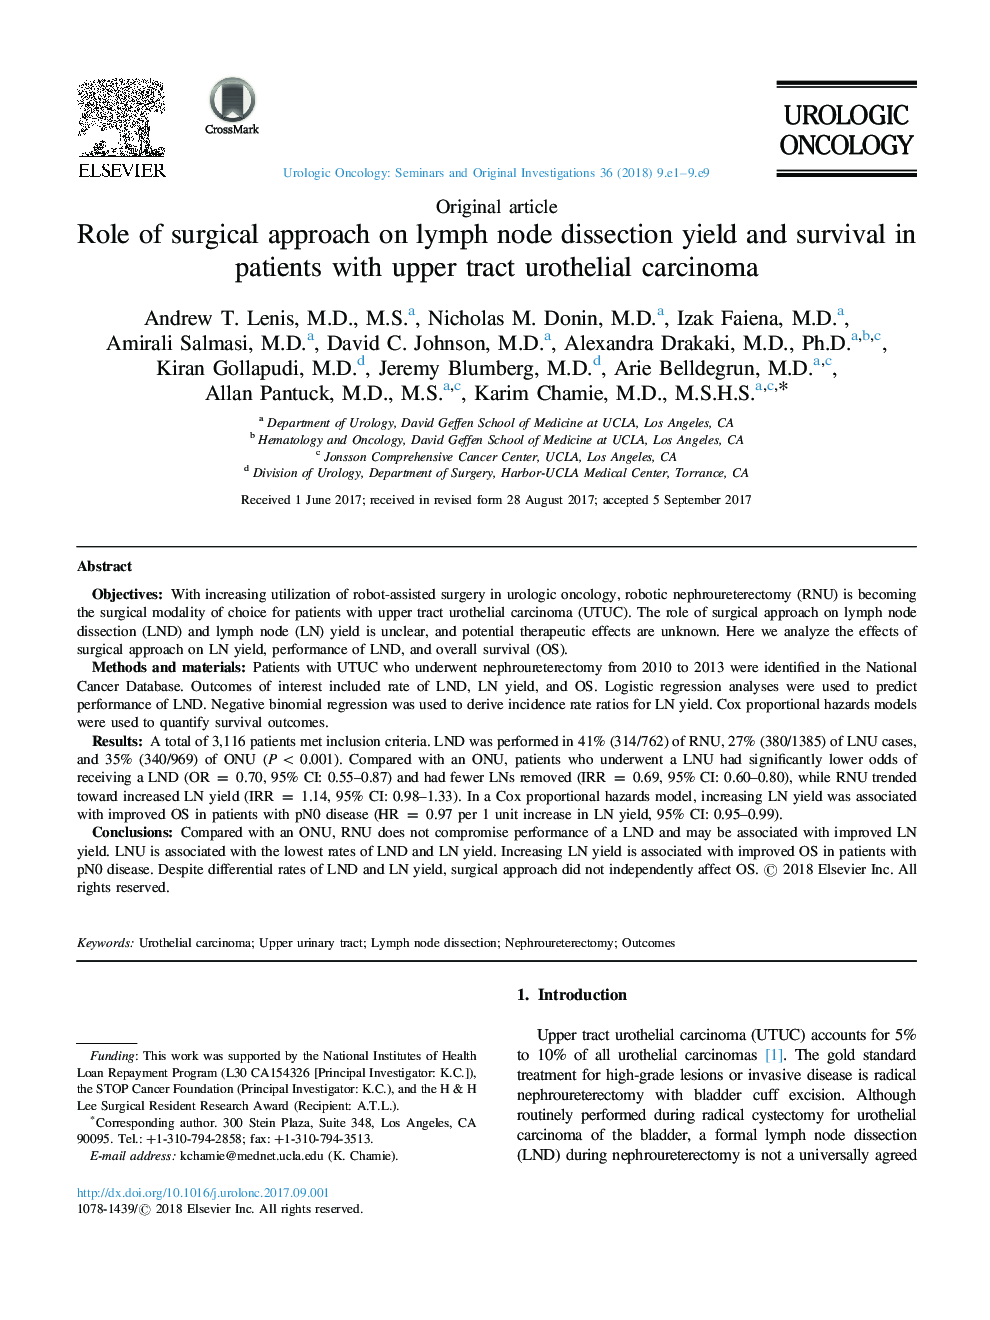 Role of surgical approach on lymph node dissection yield and survival in patients with upper tract urothelial carcinoma